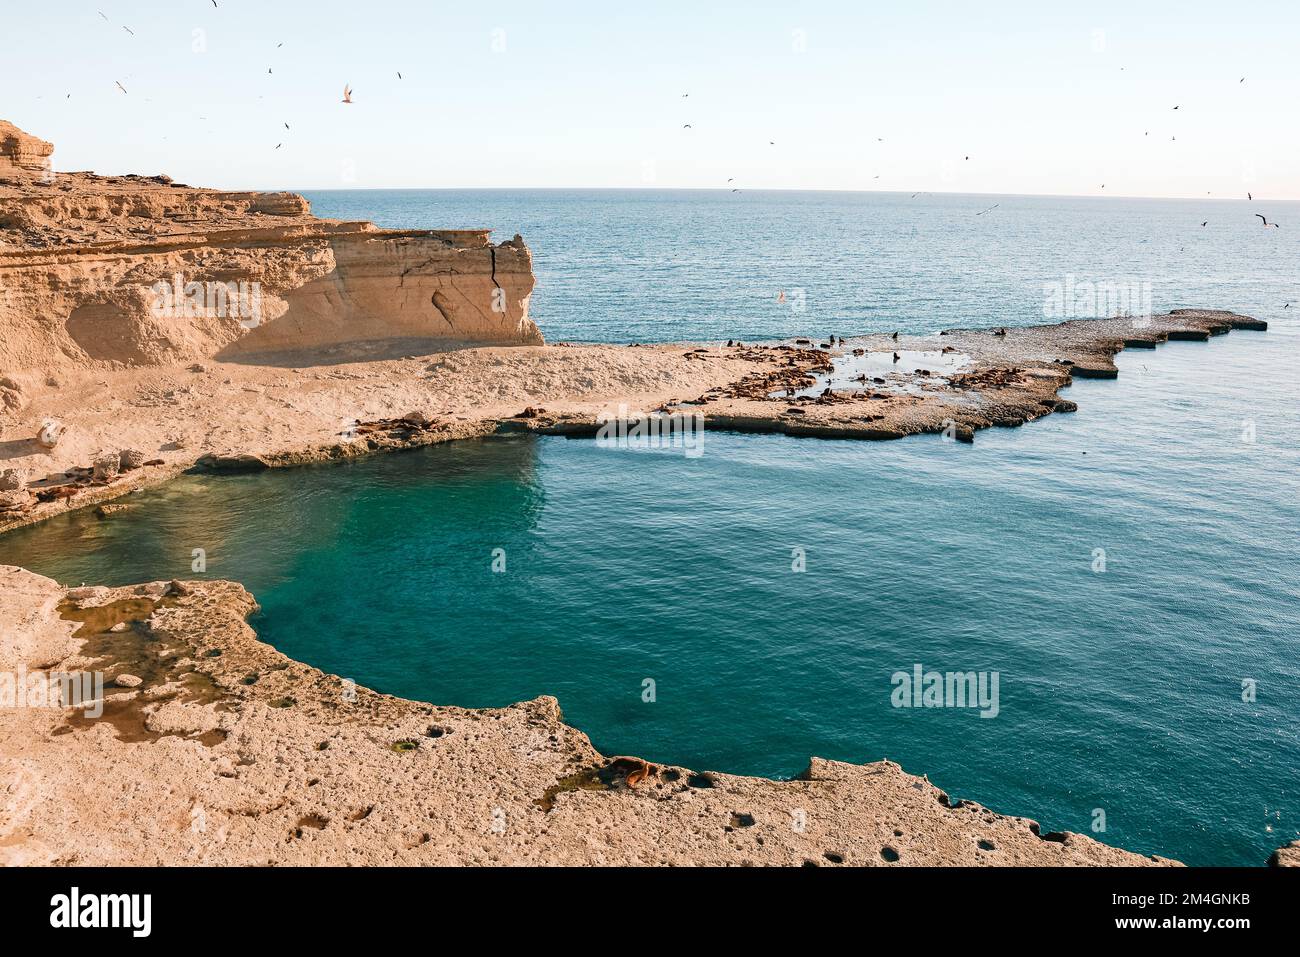 Beautiful scenery with cliffs, blue sea, birds and sea lions during sunset in the Patagonian coast of Argentina near of Puerto Madryn. Loberia viewpoi Stock Photo